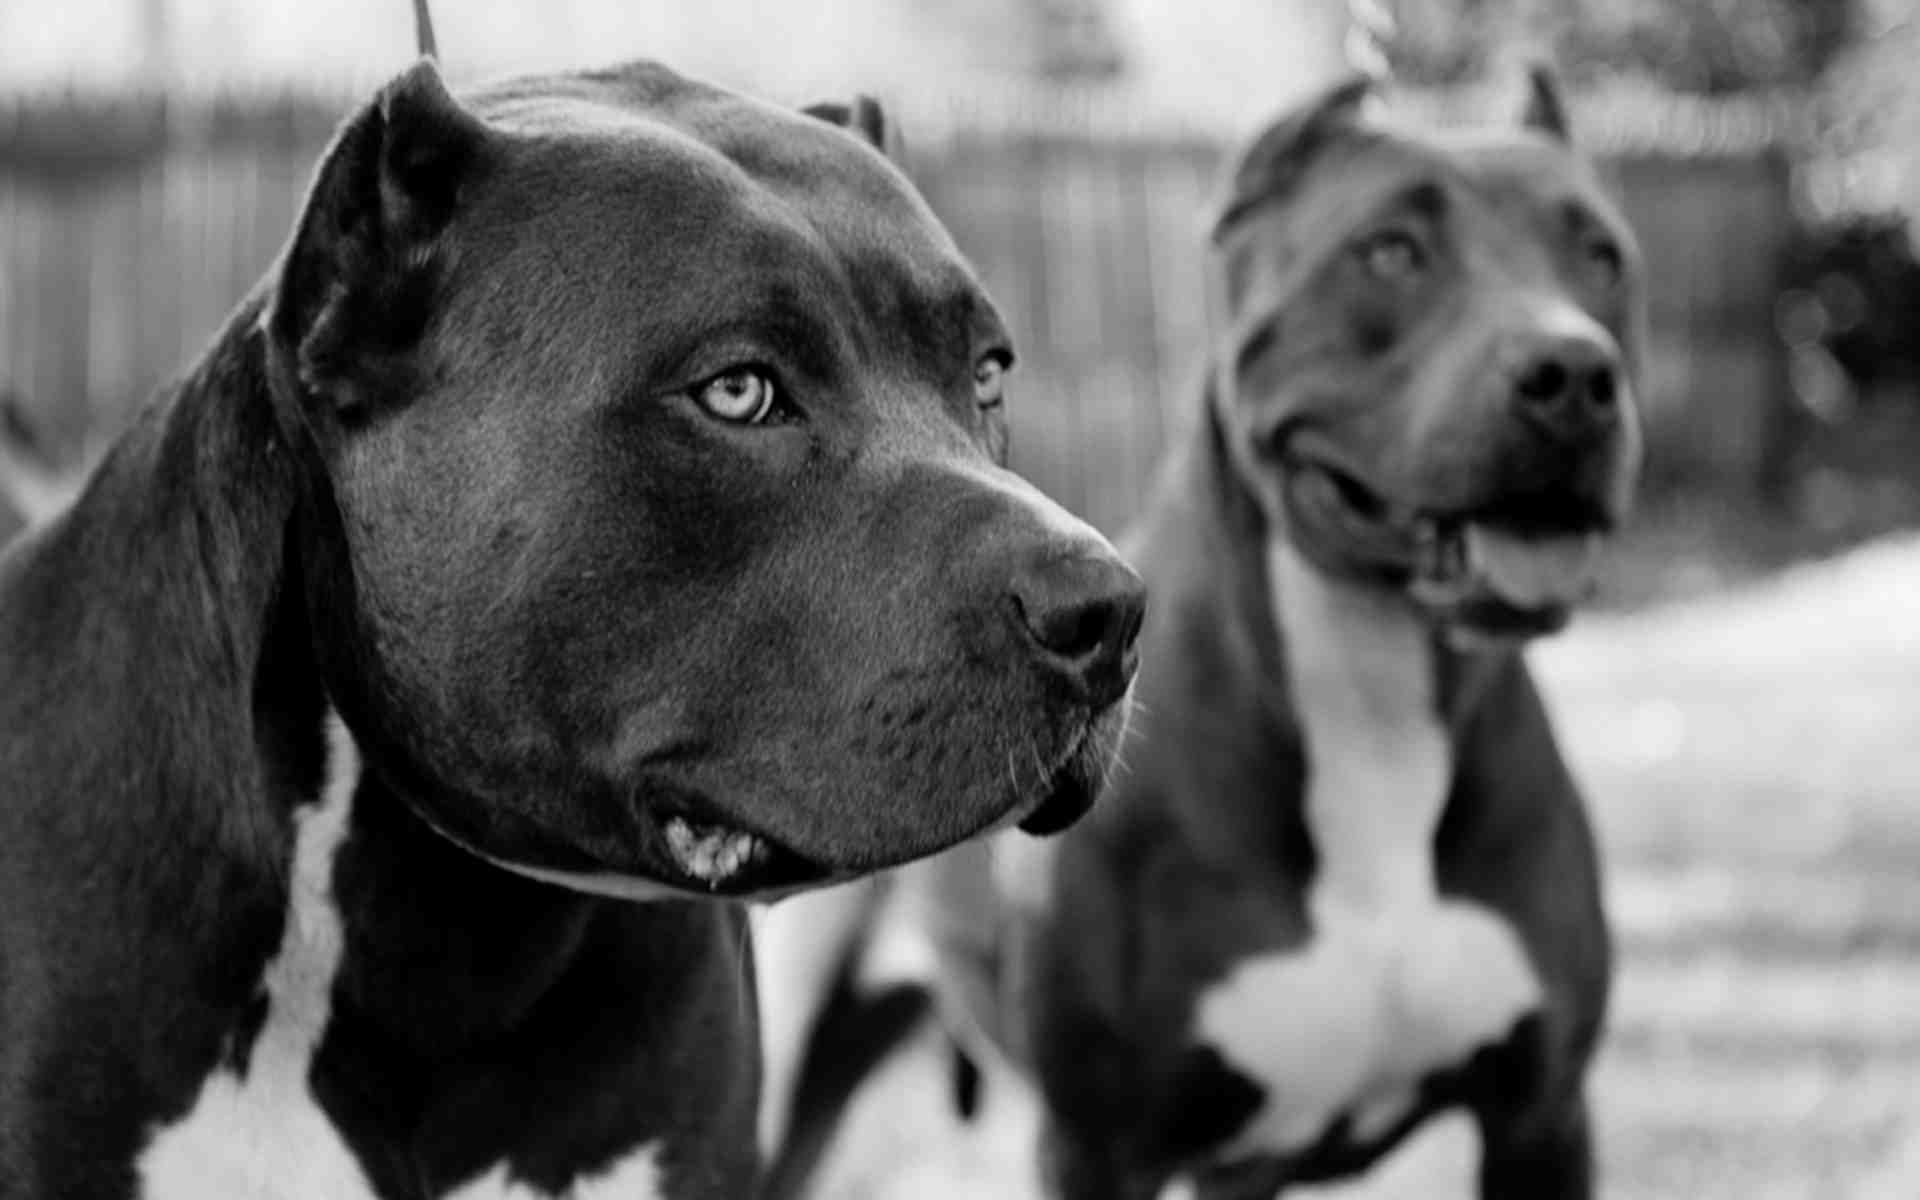 Black pitbulls wallpapers and images - wallpapers, pictures, photos